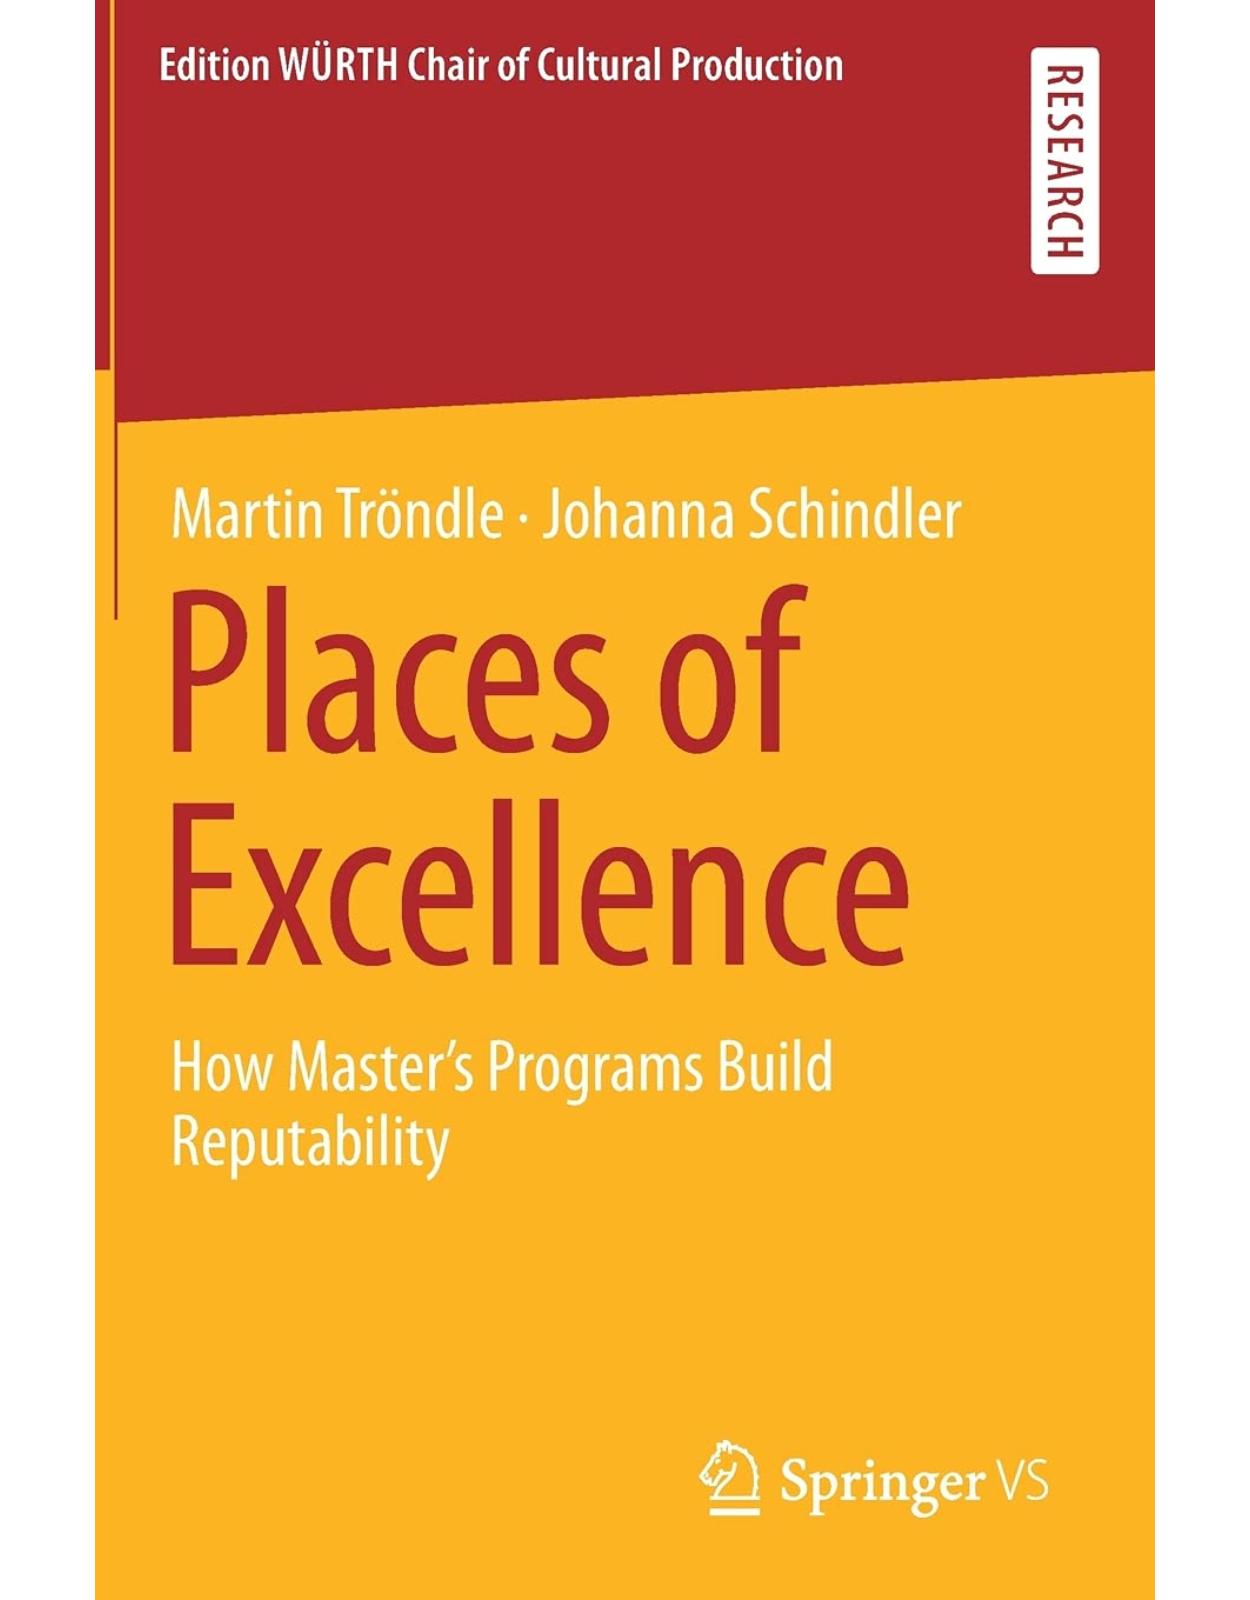 Places of Excellence: How Master’s Programs Build Reputability